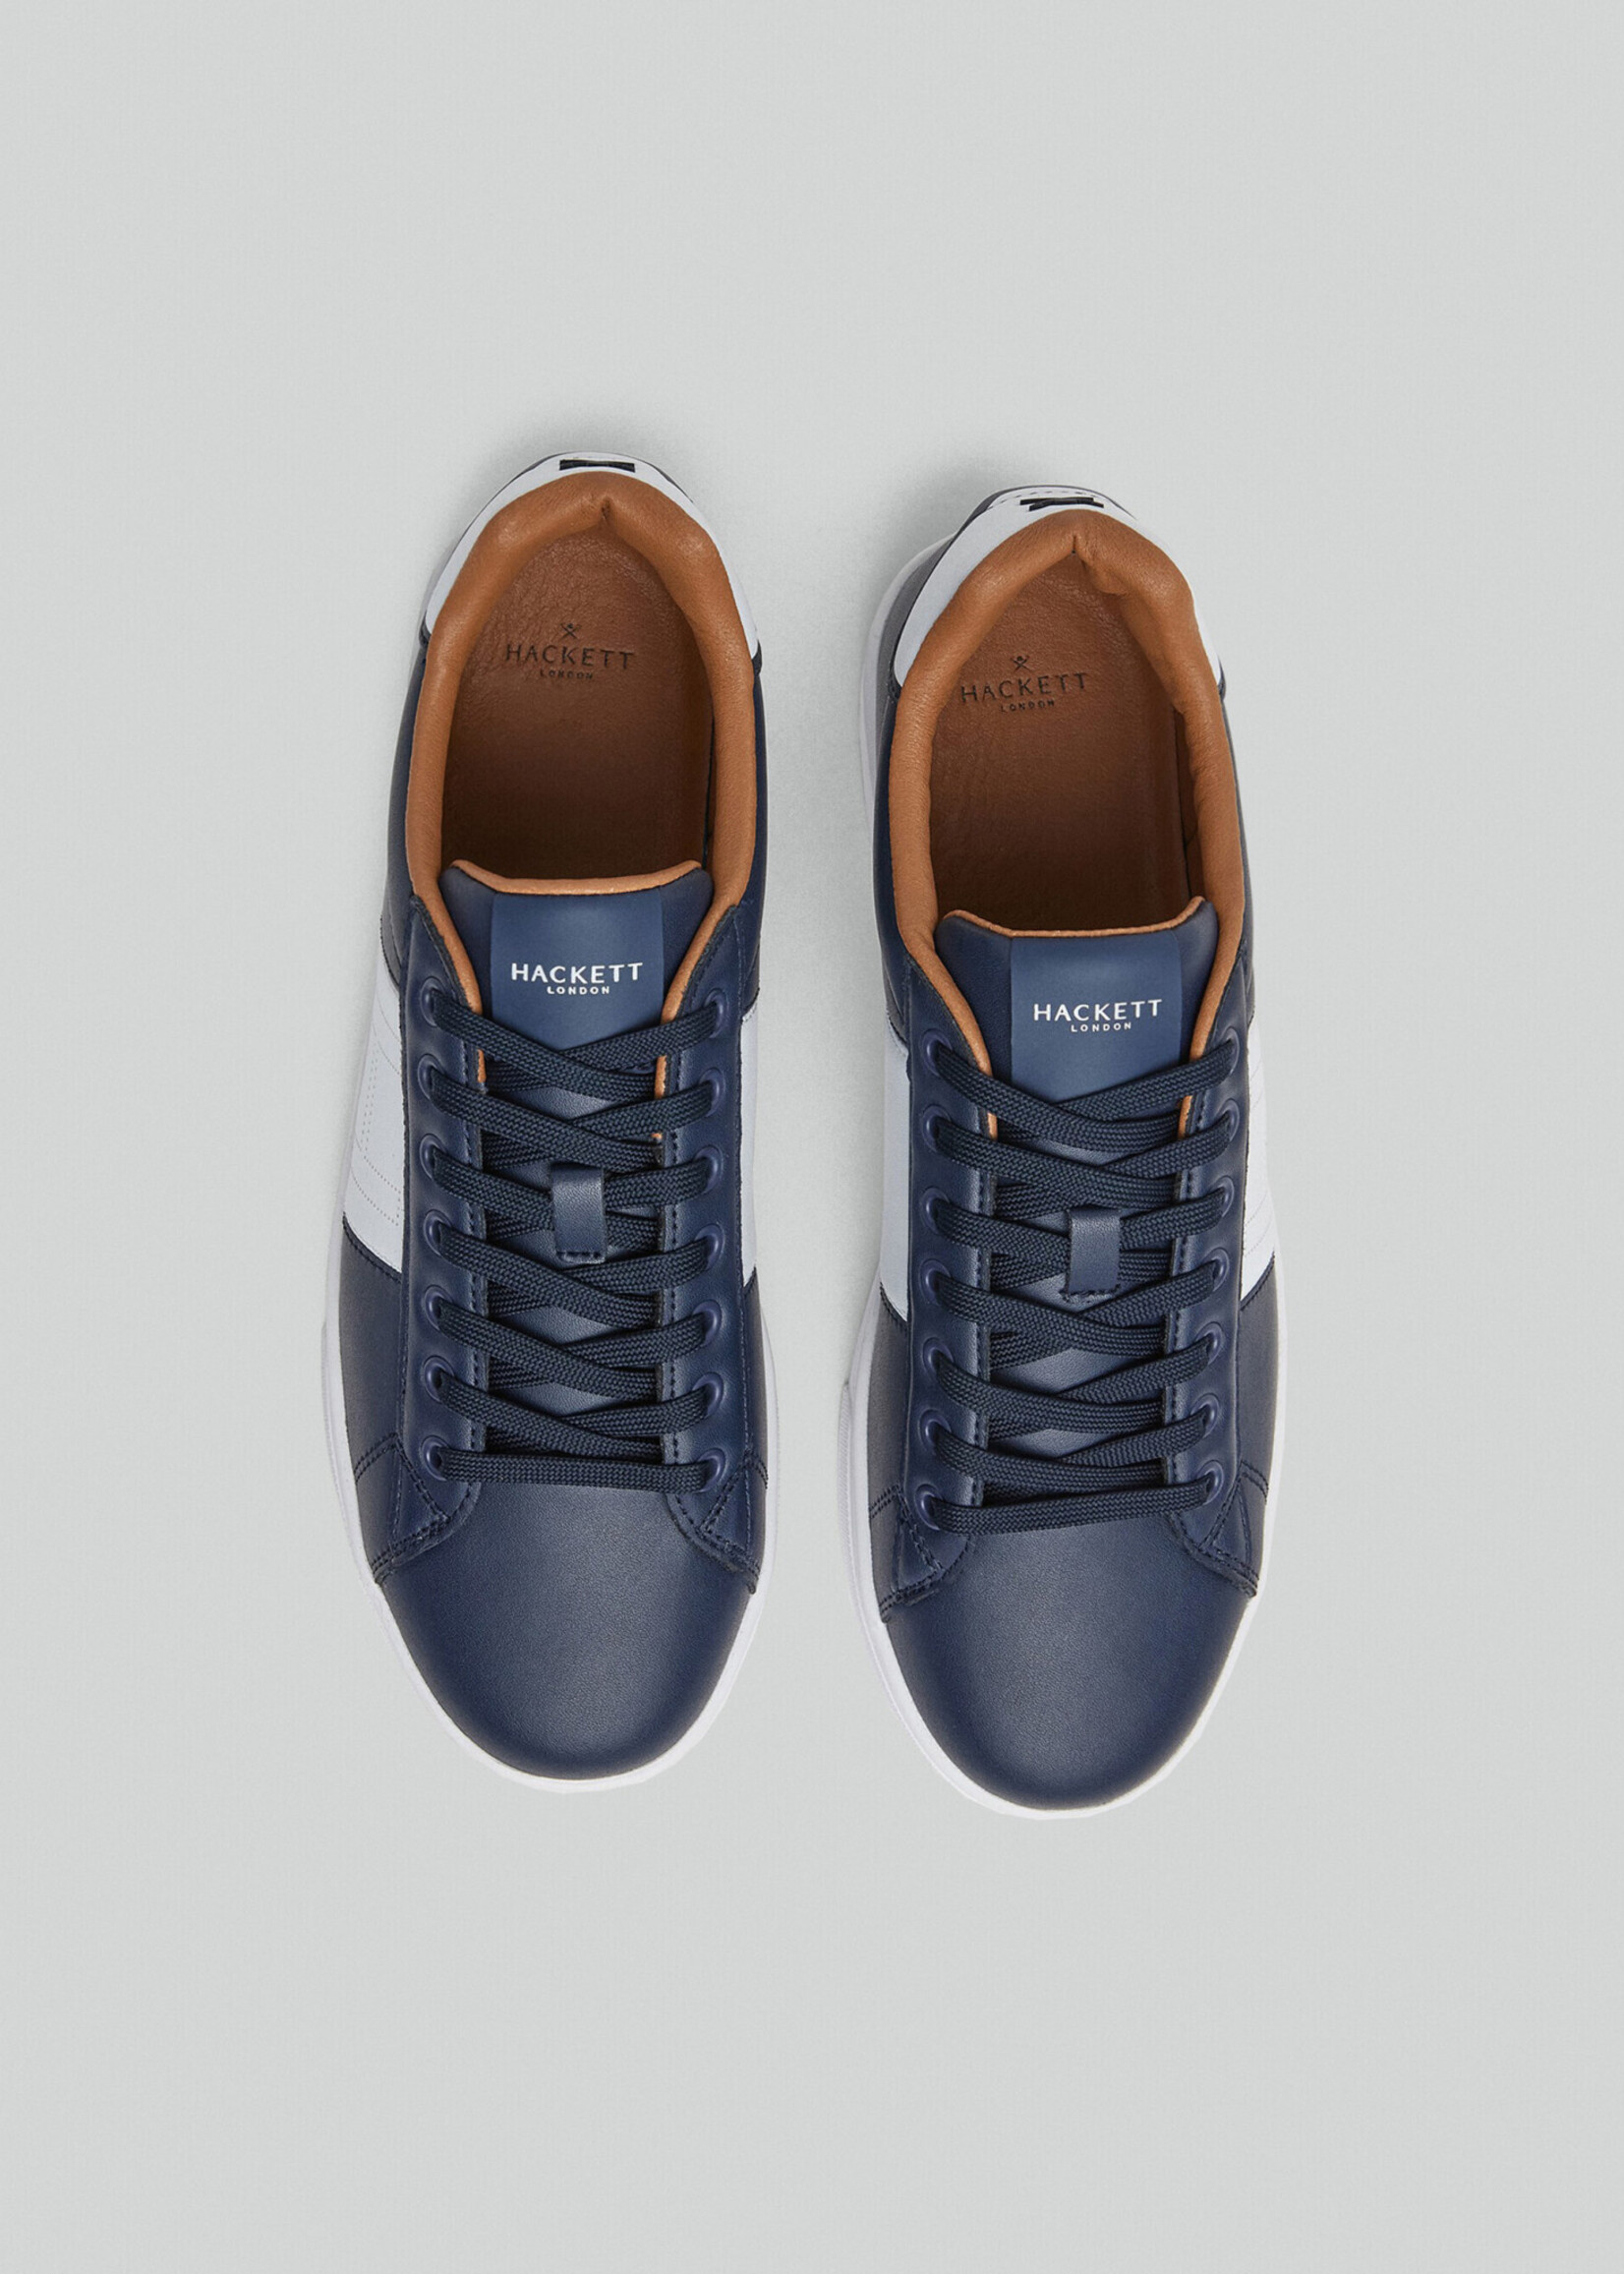 HACKETT Microperforated LeatherTrainers - Navy